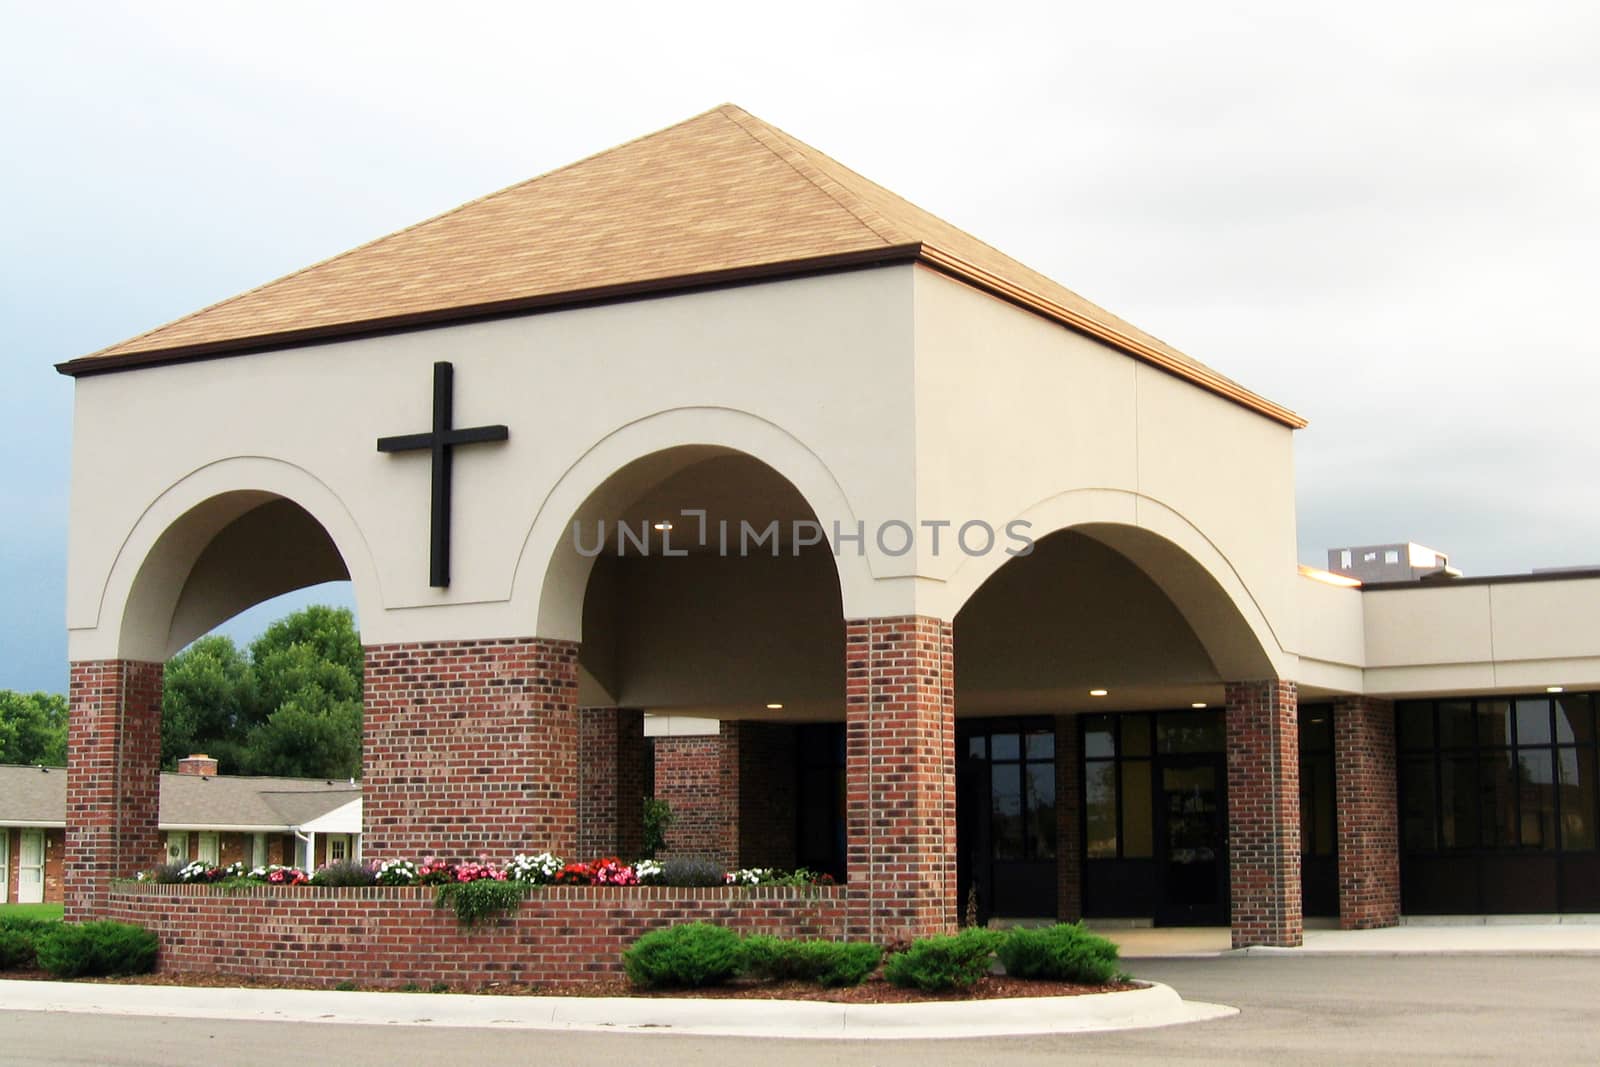 Modern church entrance with a cross on the building.